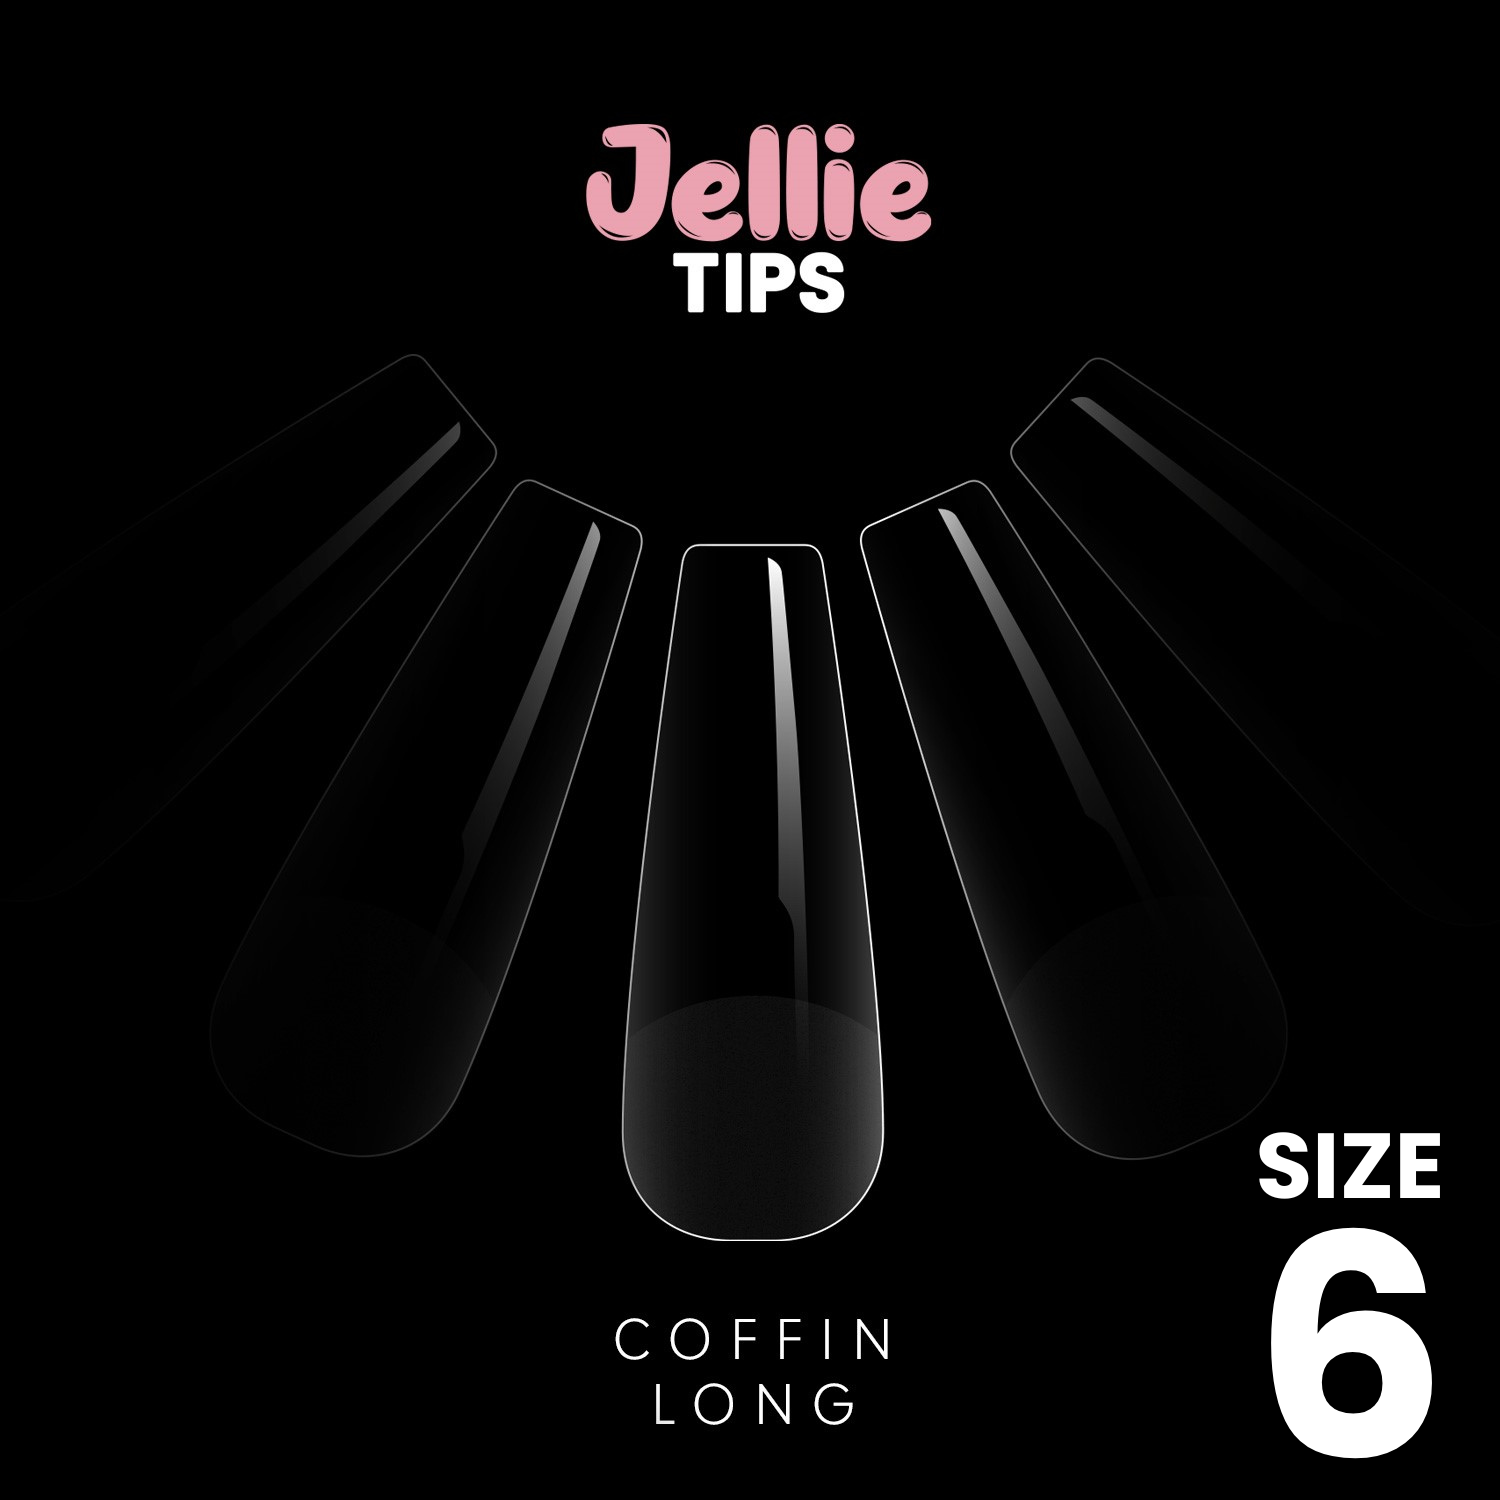 Halo Jellie Nail Tips Coffin Long, Sizes 6, 50 One Size